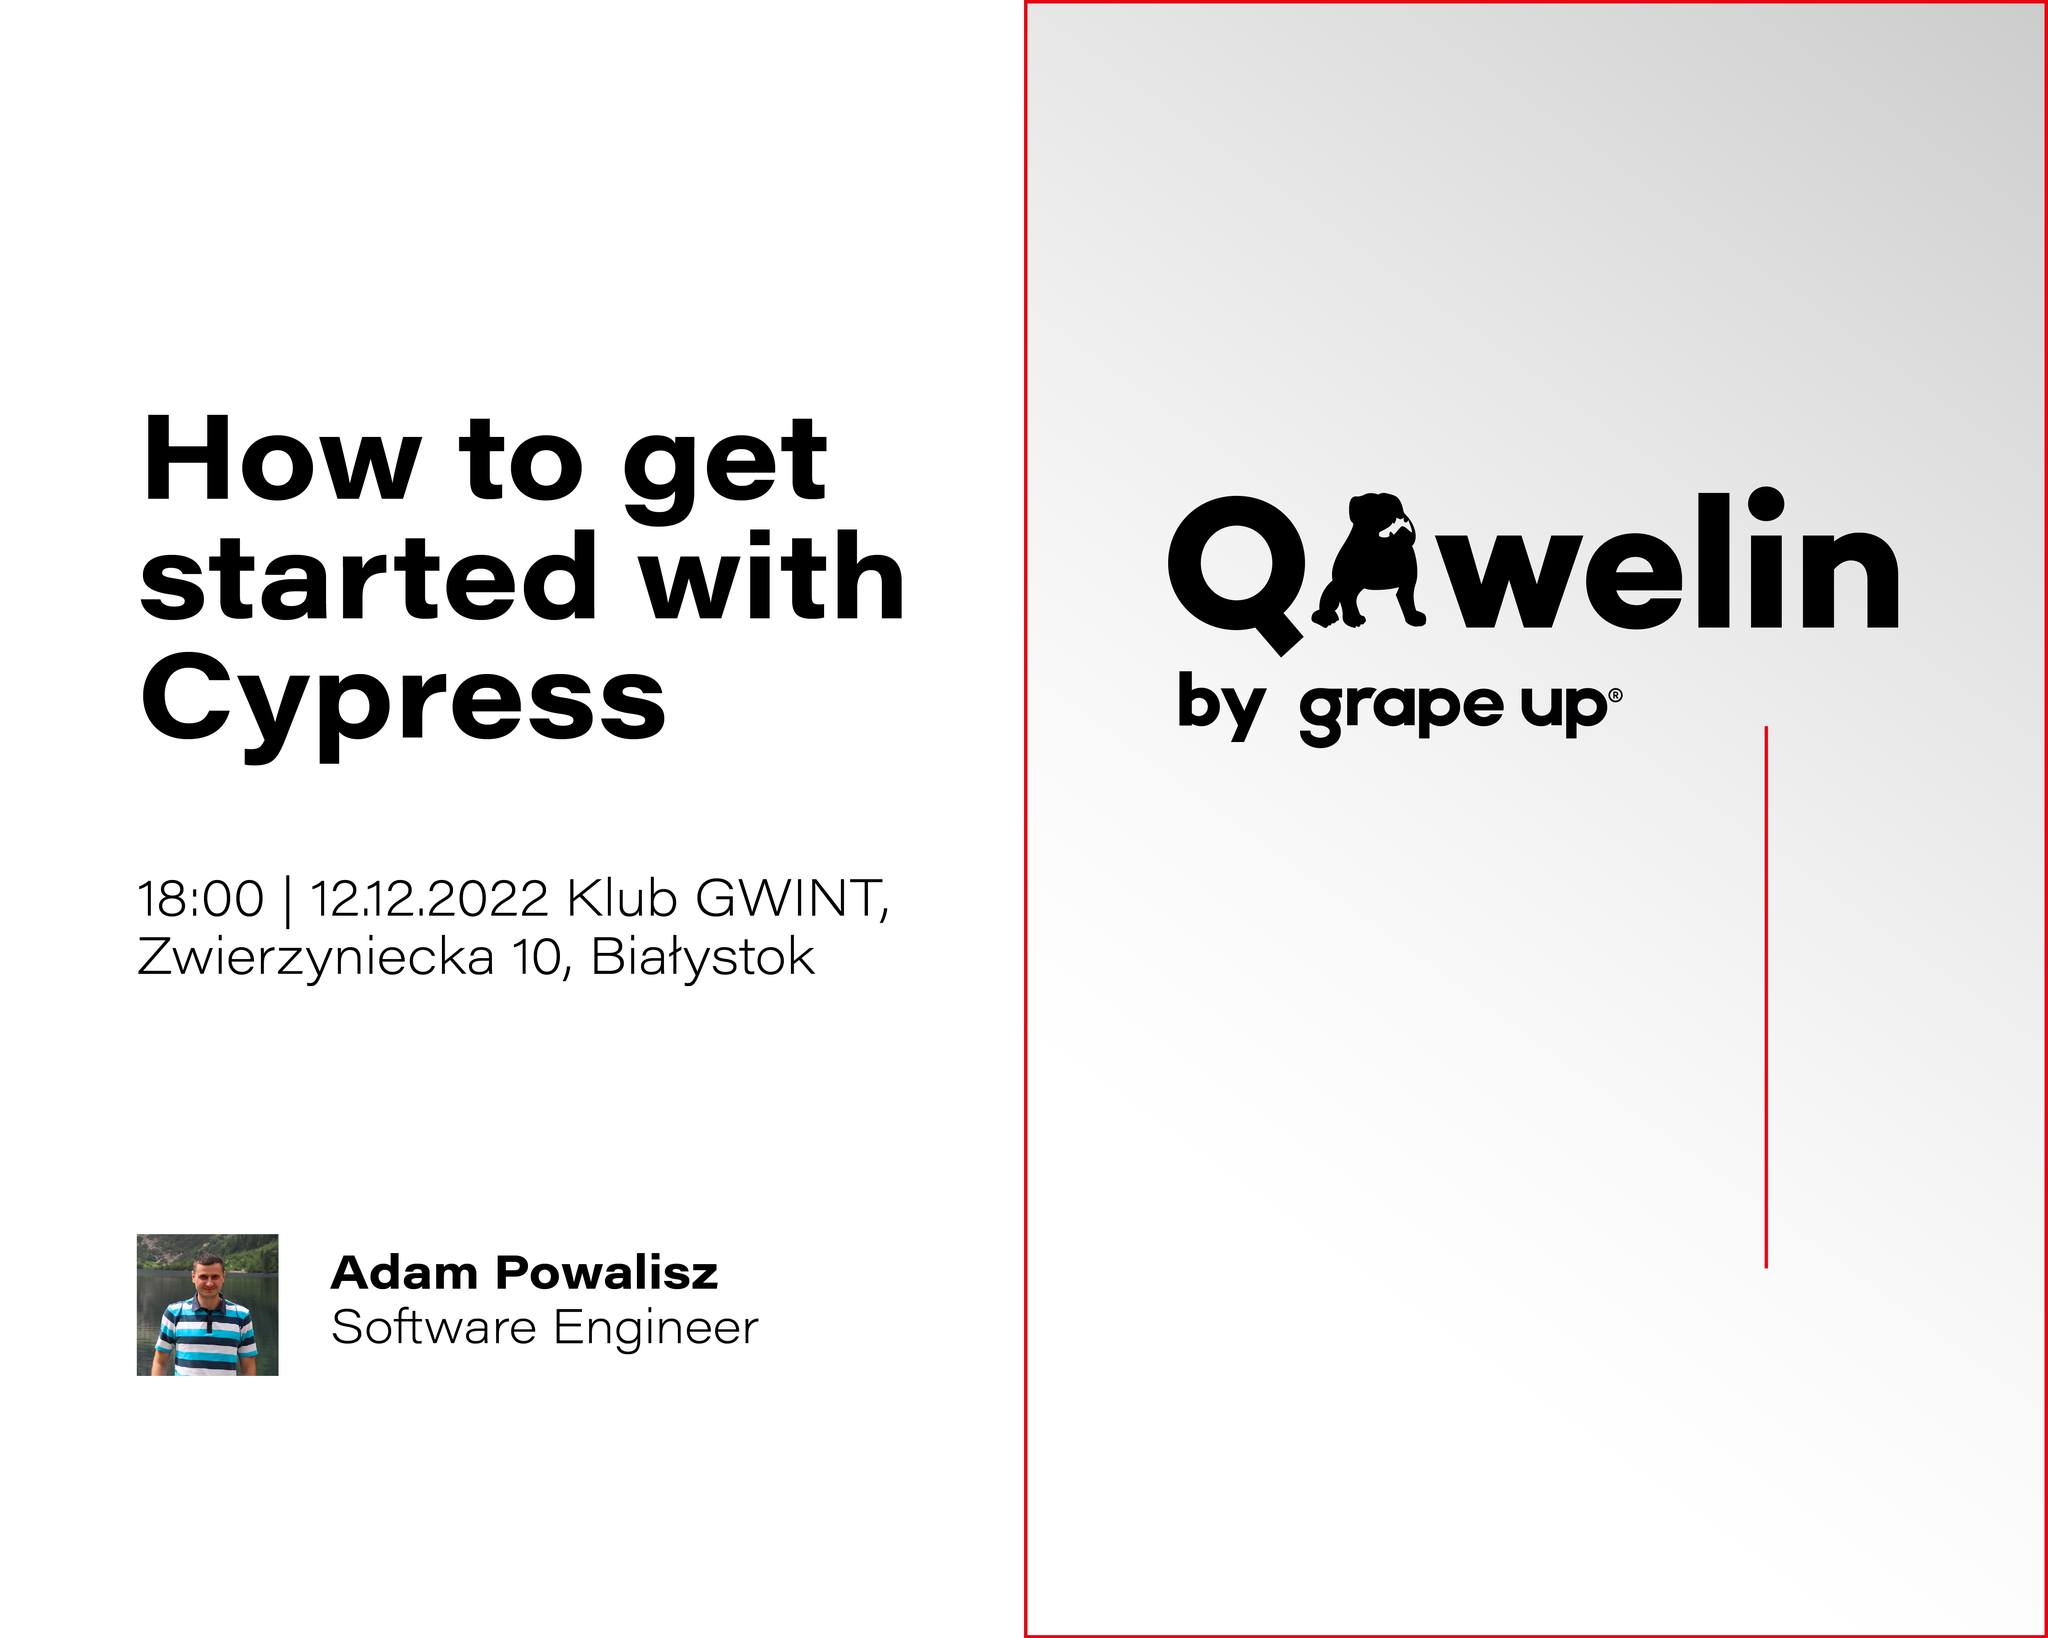 qawelin-powered-by-grape-up-4-how-to-get-started-with-cypress